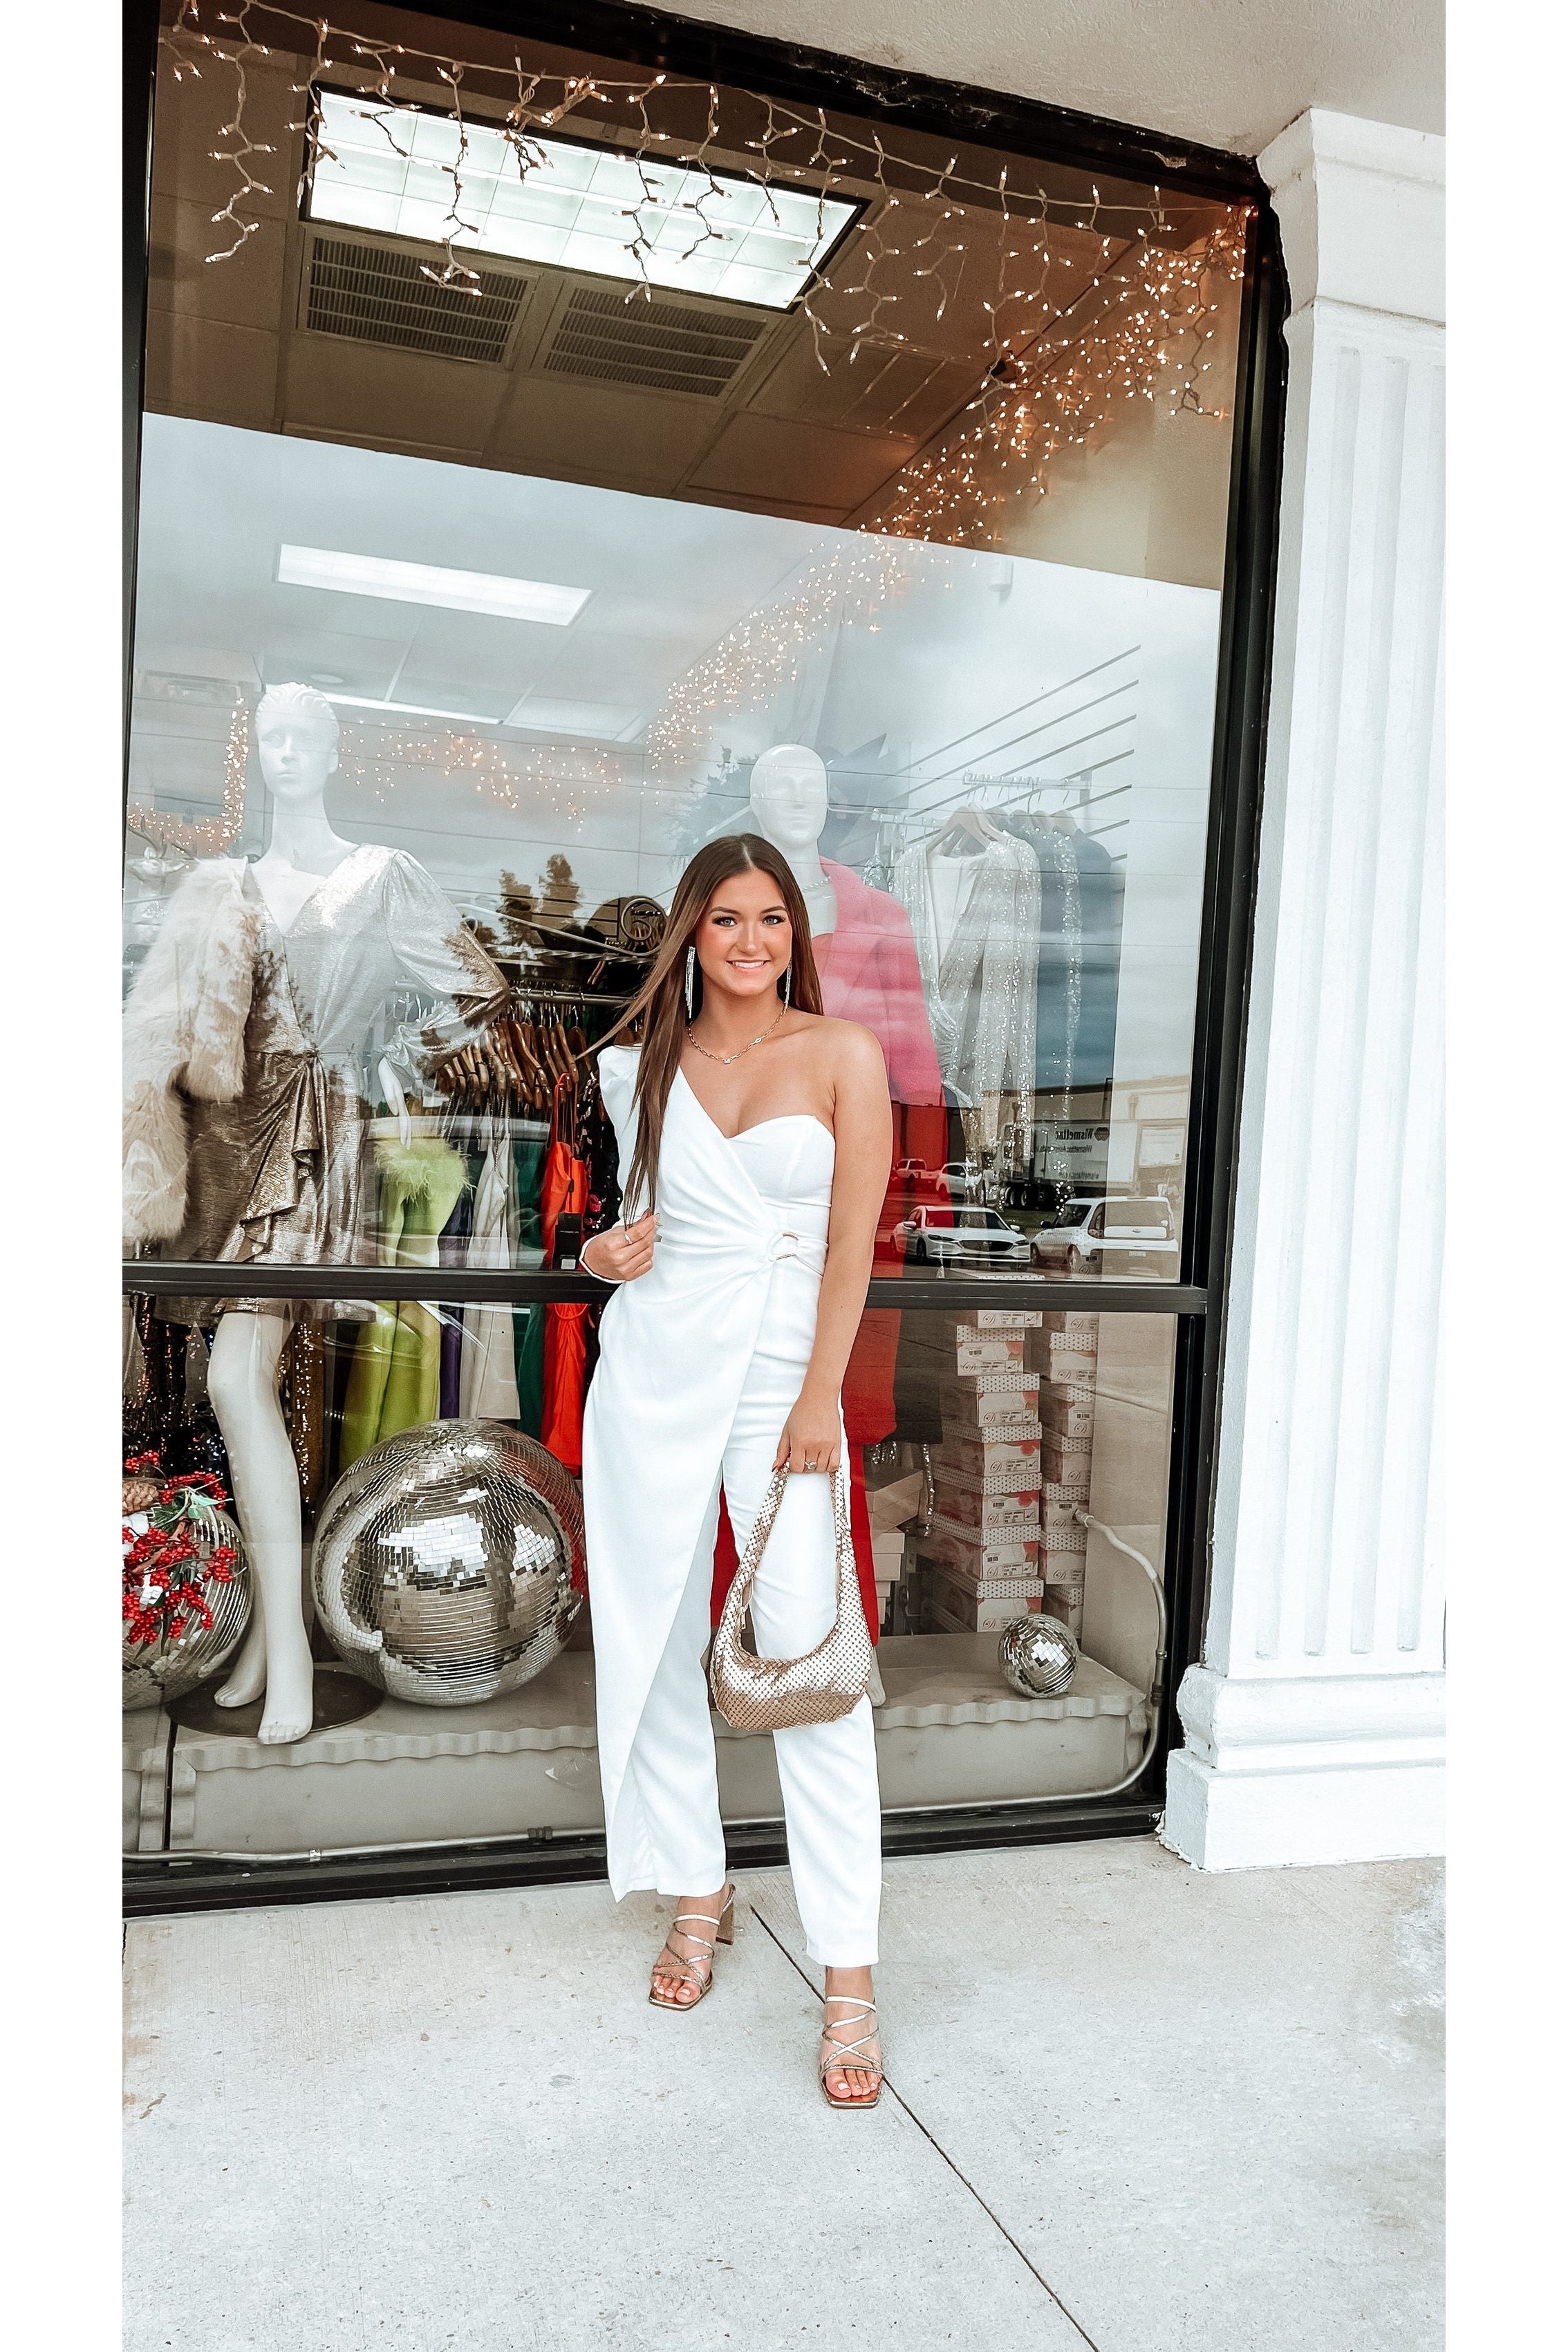 White one-piece flowy jumpsuit with slits. – My Sister's Keeper Boutique LLC